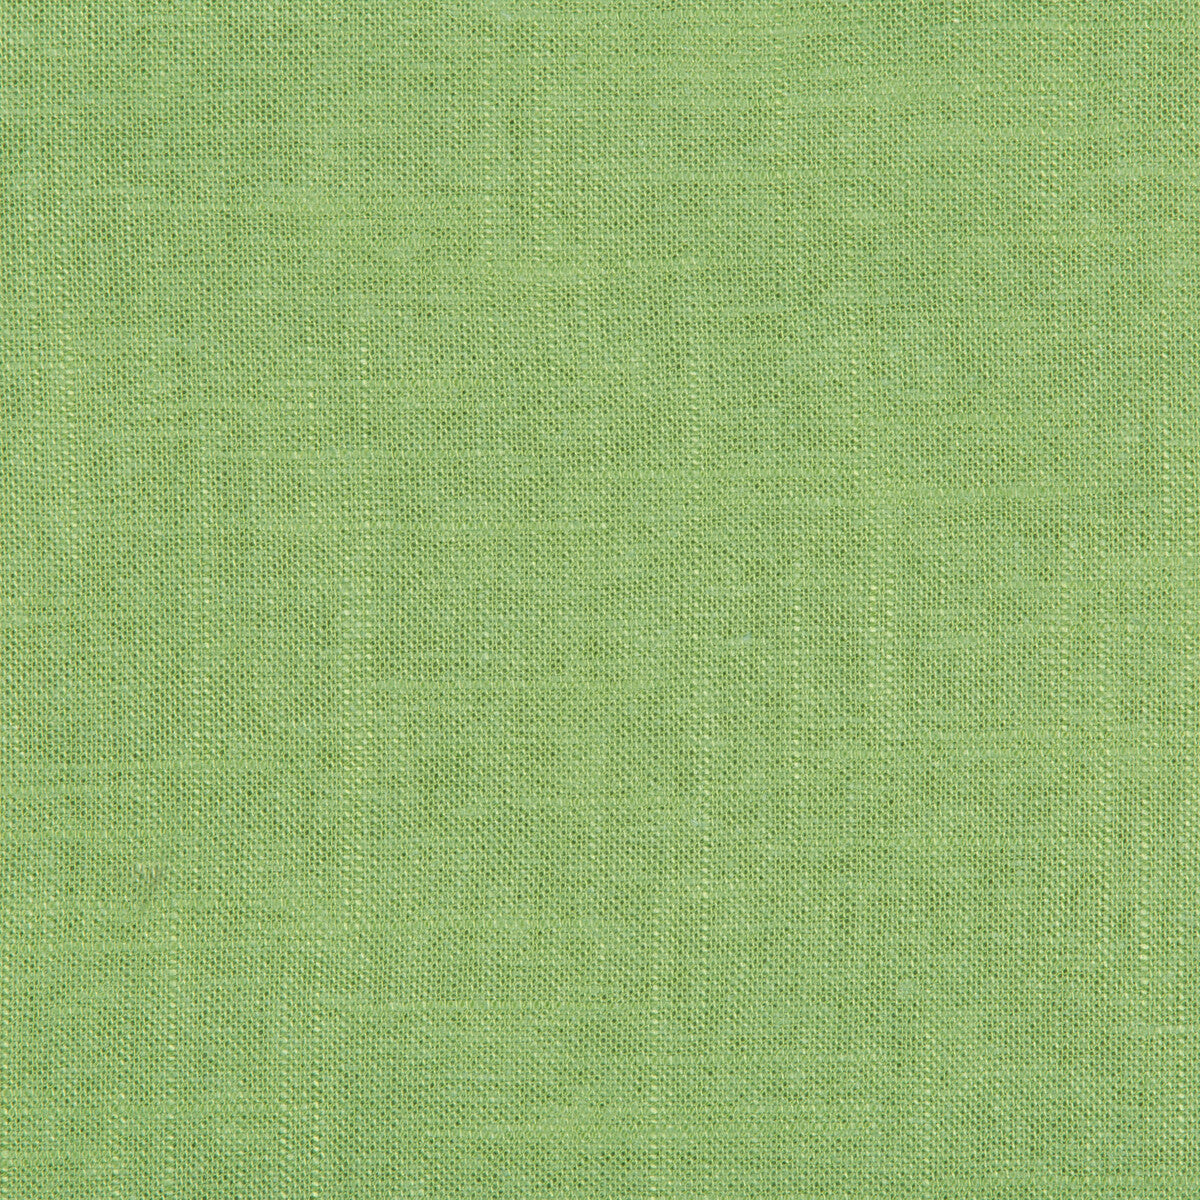 Emmie fabric in jade color - pattern 35982.3333.0 - by Kravet Design in the Barry Lantz Canvas To Cloth collection